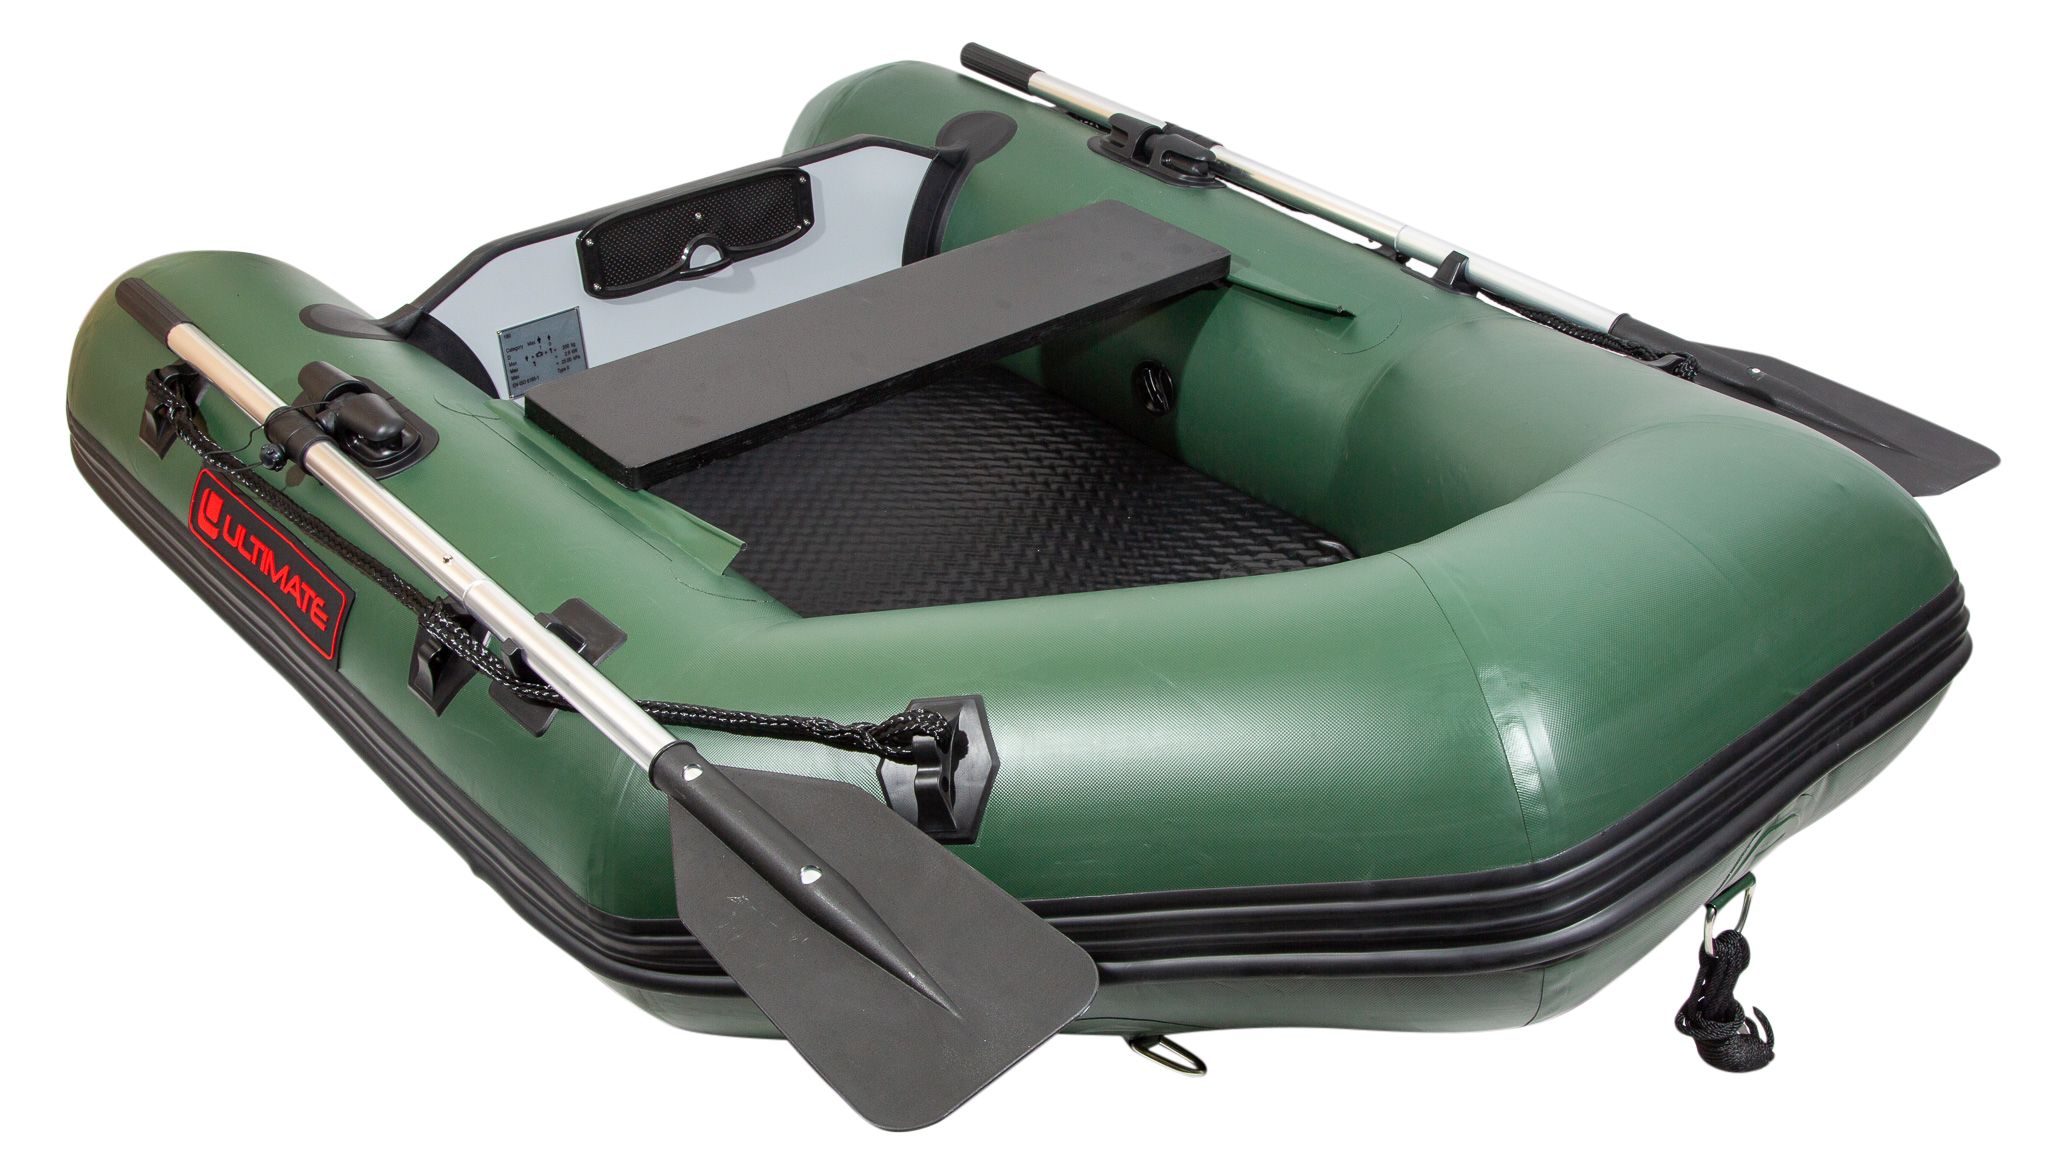 Bateau gonflable Ultimate 180 Airdeck